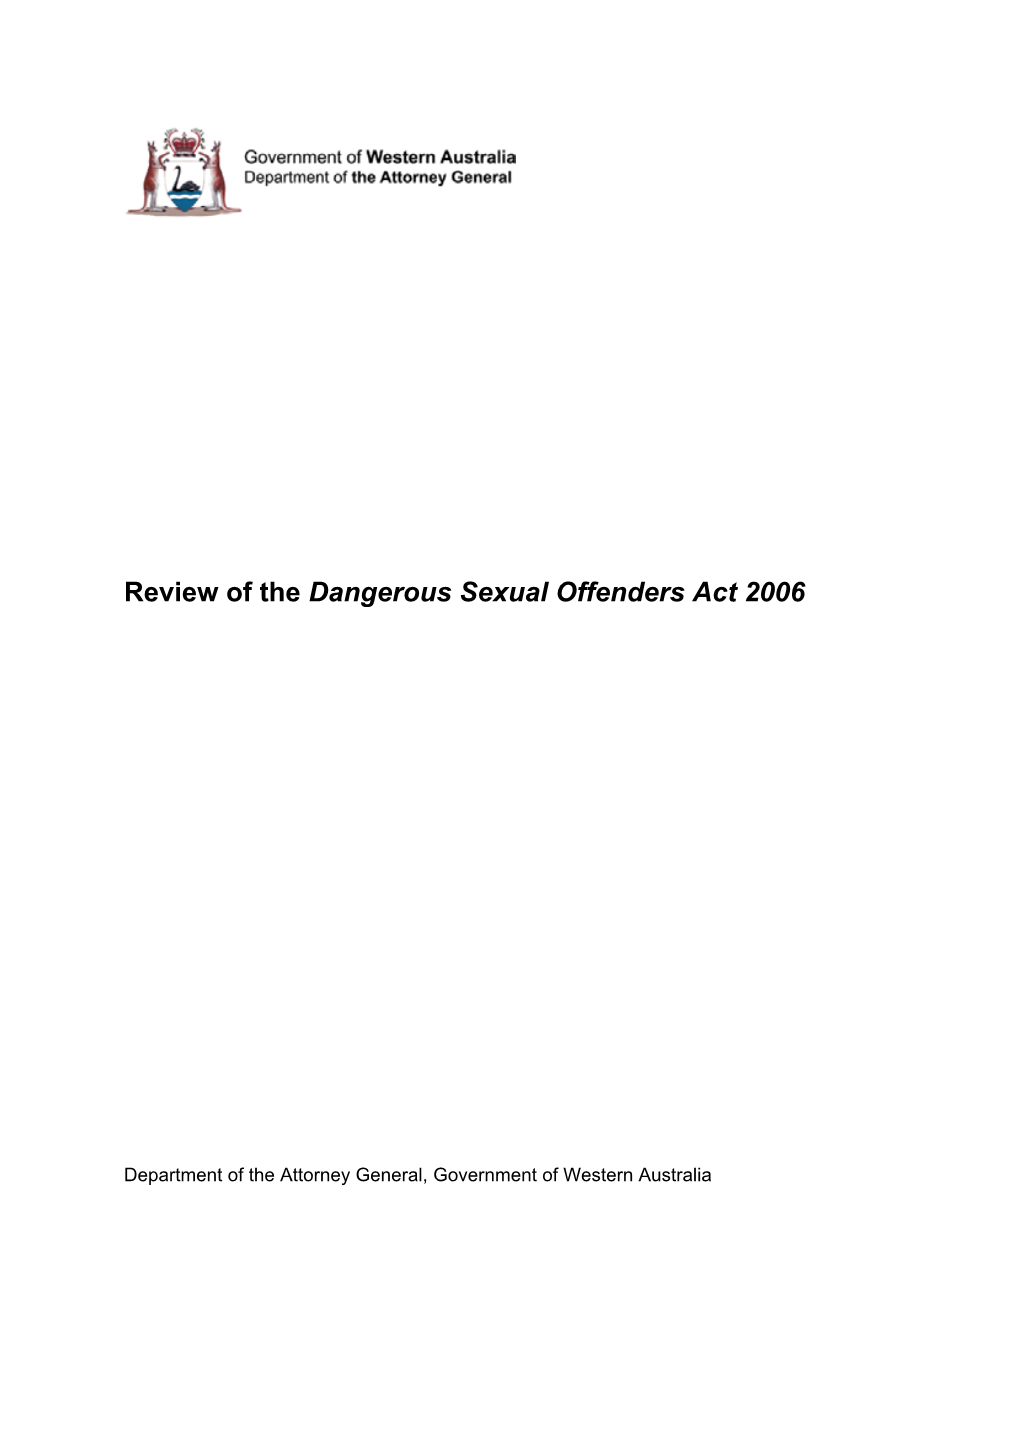 Review of the Dangerous Sexual Offenders Act 2006